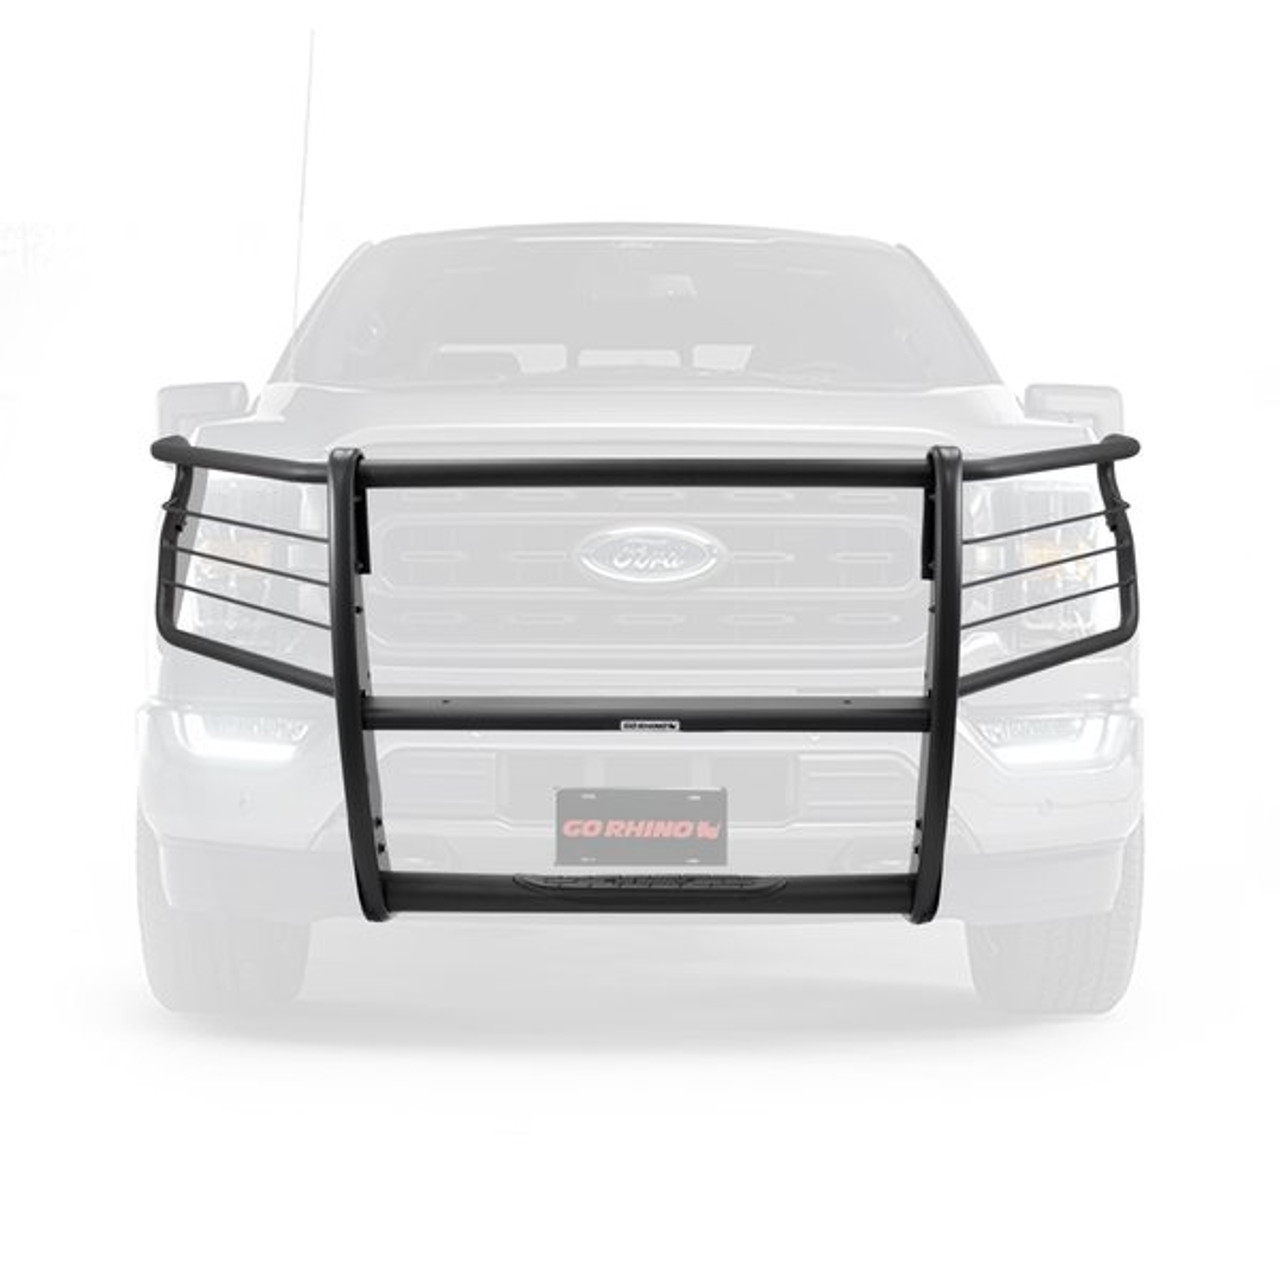 Go Rhino 3296MT Ford F-150 2018-2020 3100 Series StepGuard - Center Grille + Brush Guards, Black Textured Mild Steel Installation Kit Included